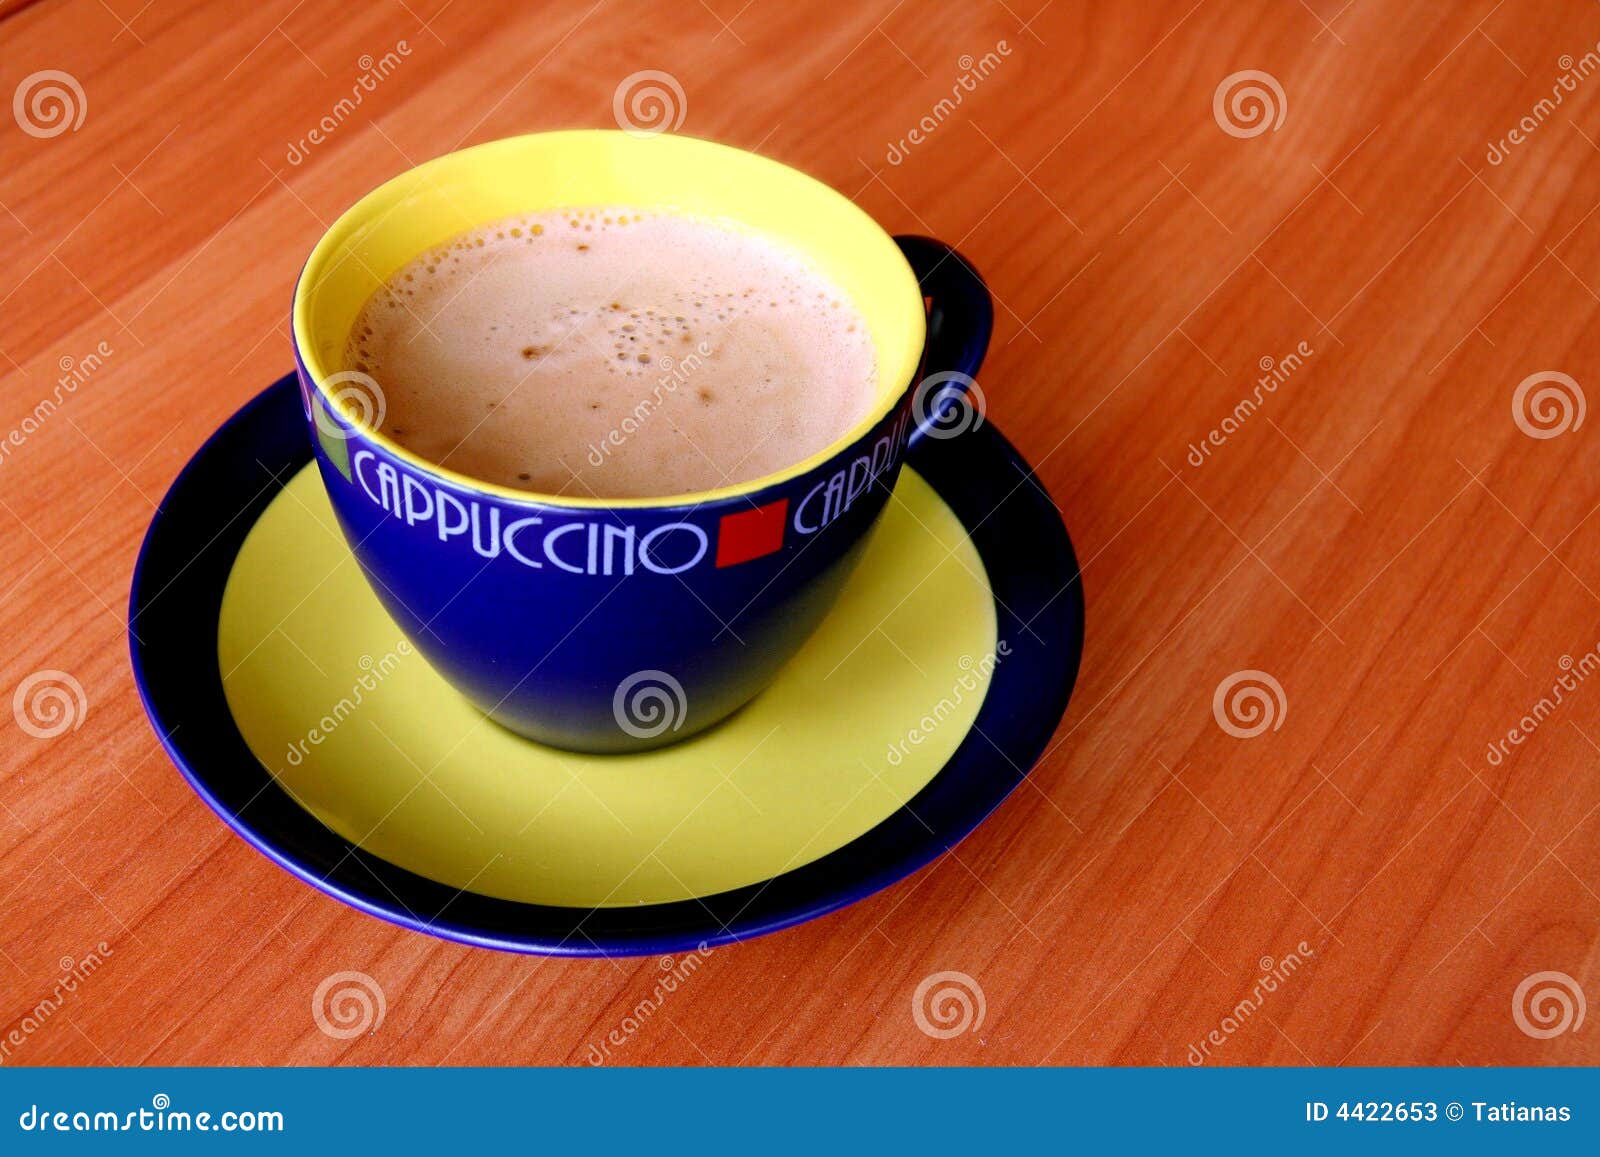 a cup of capuccino.